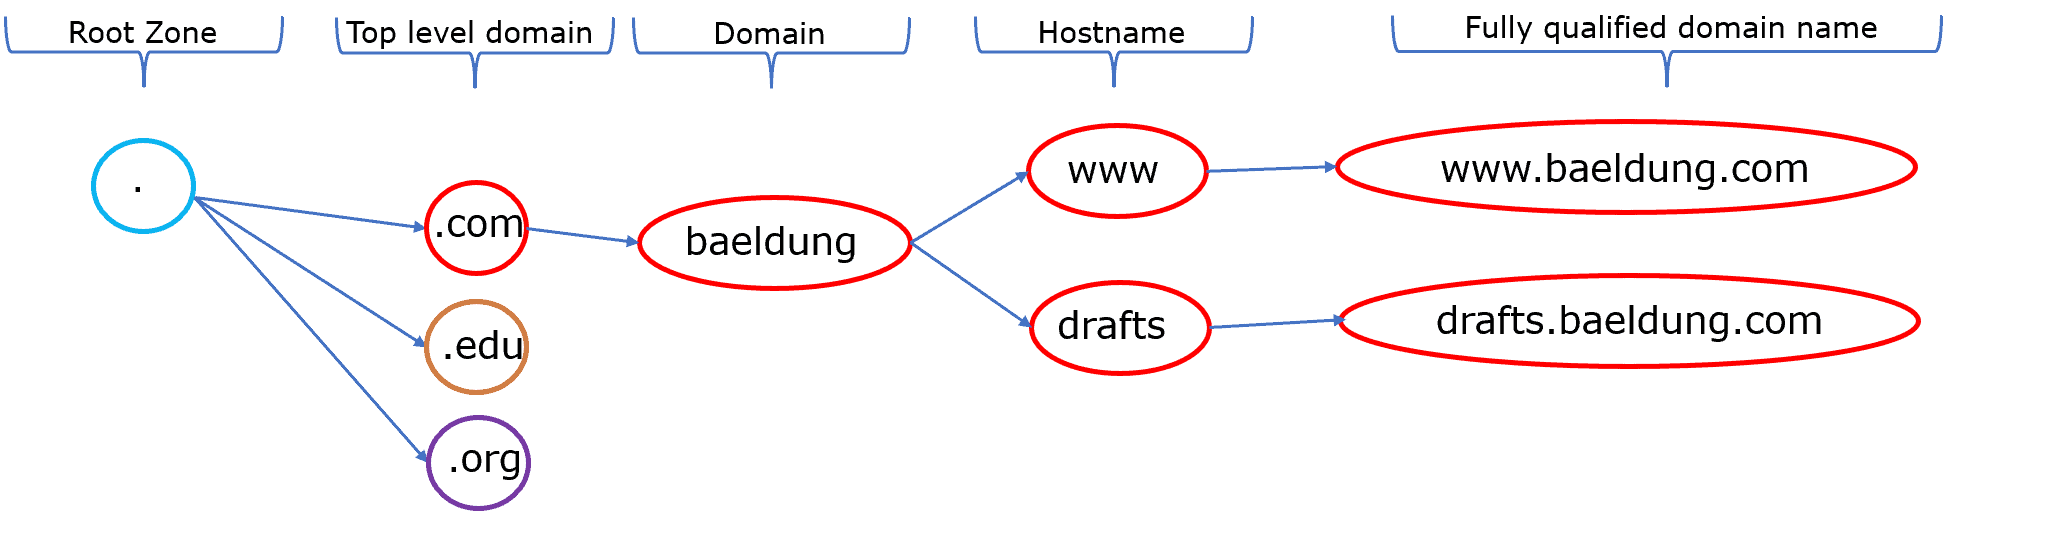 This image shows how root zone, TLD, Doman, Hostname and FQDN are related to in the context of DNS